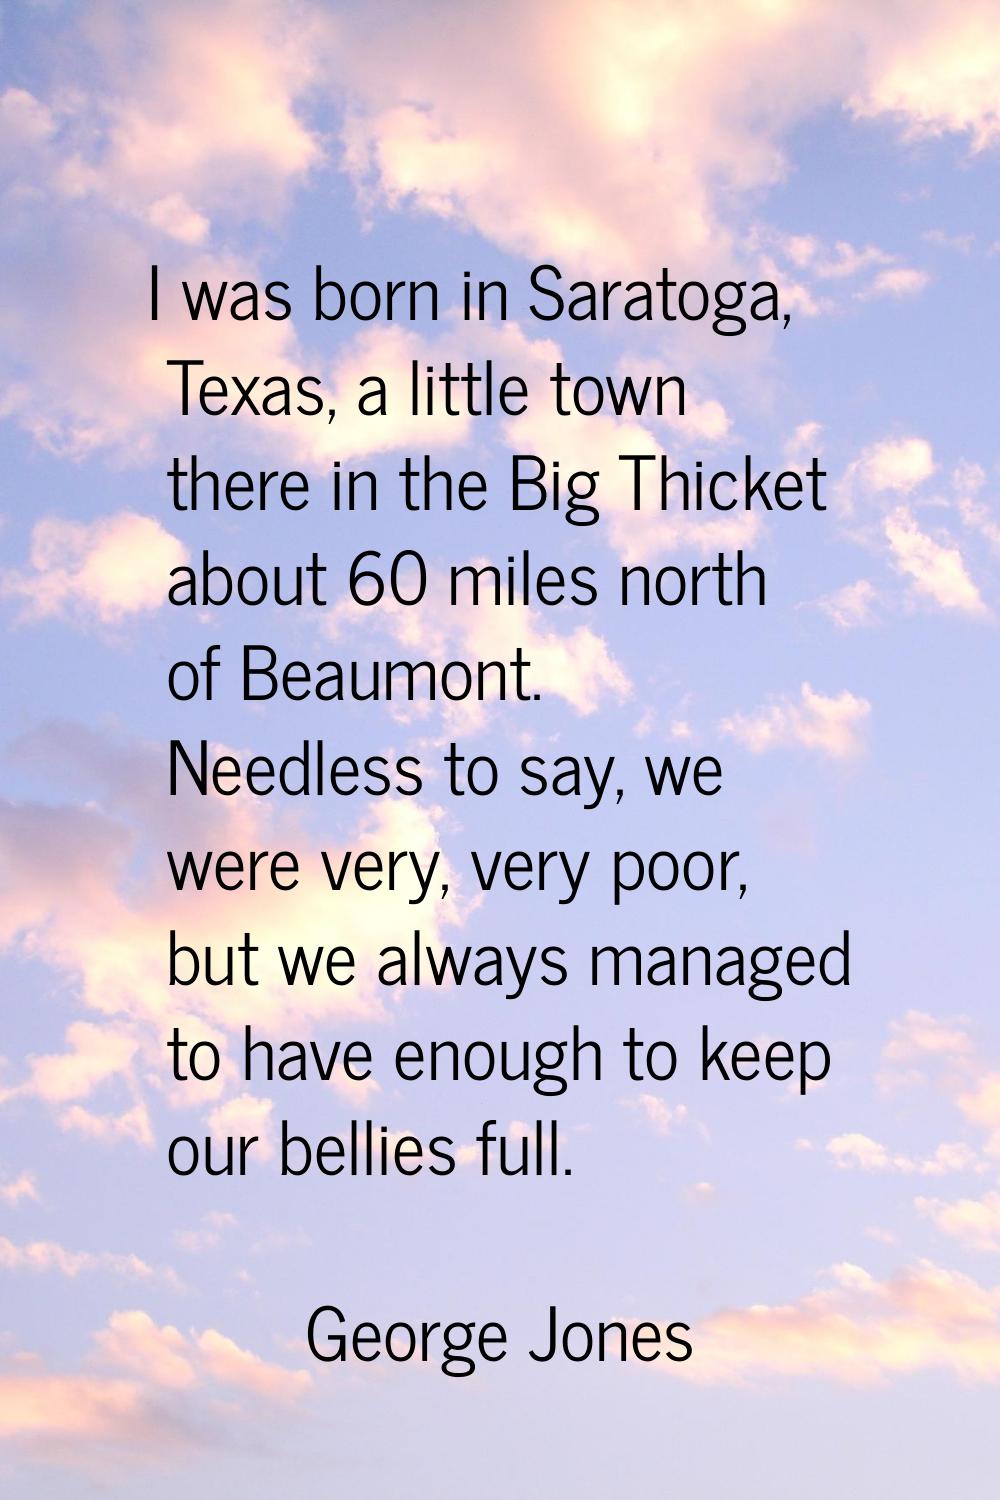 I was born in Saratoga, Texas, a little town there in the Big Thicket about 60 miles north of Beaum